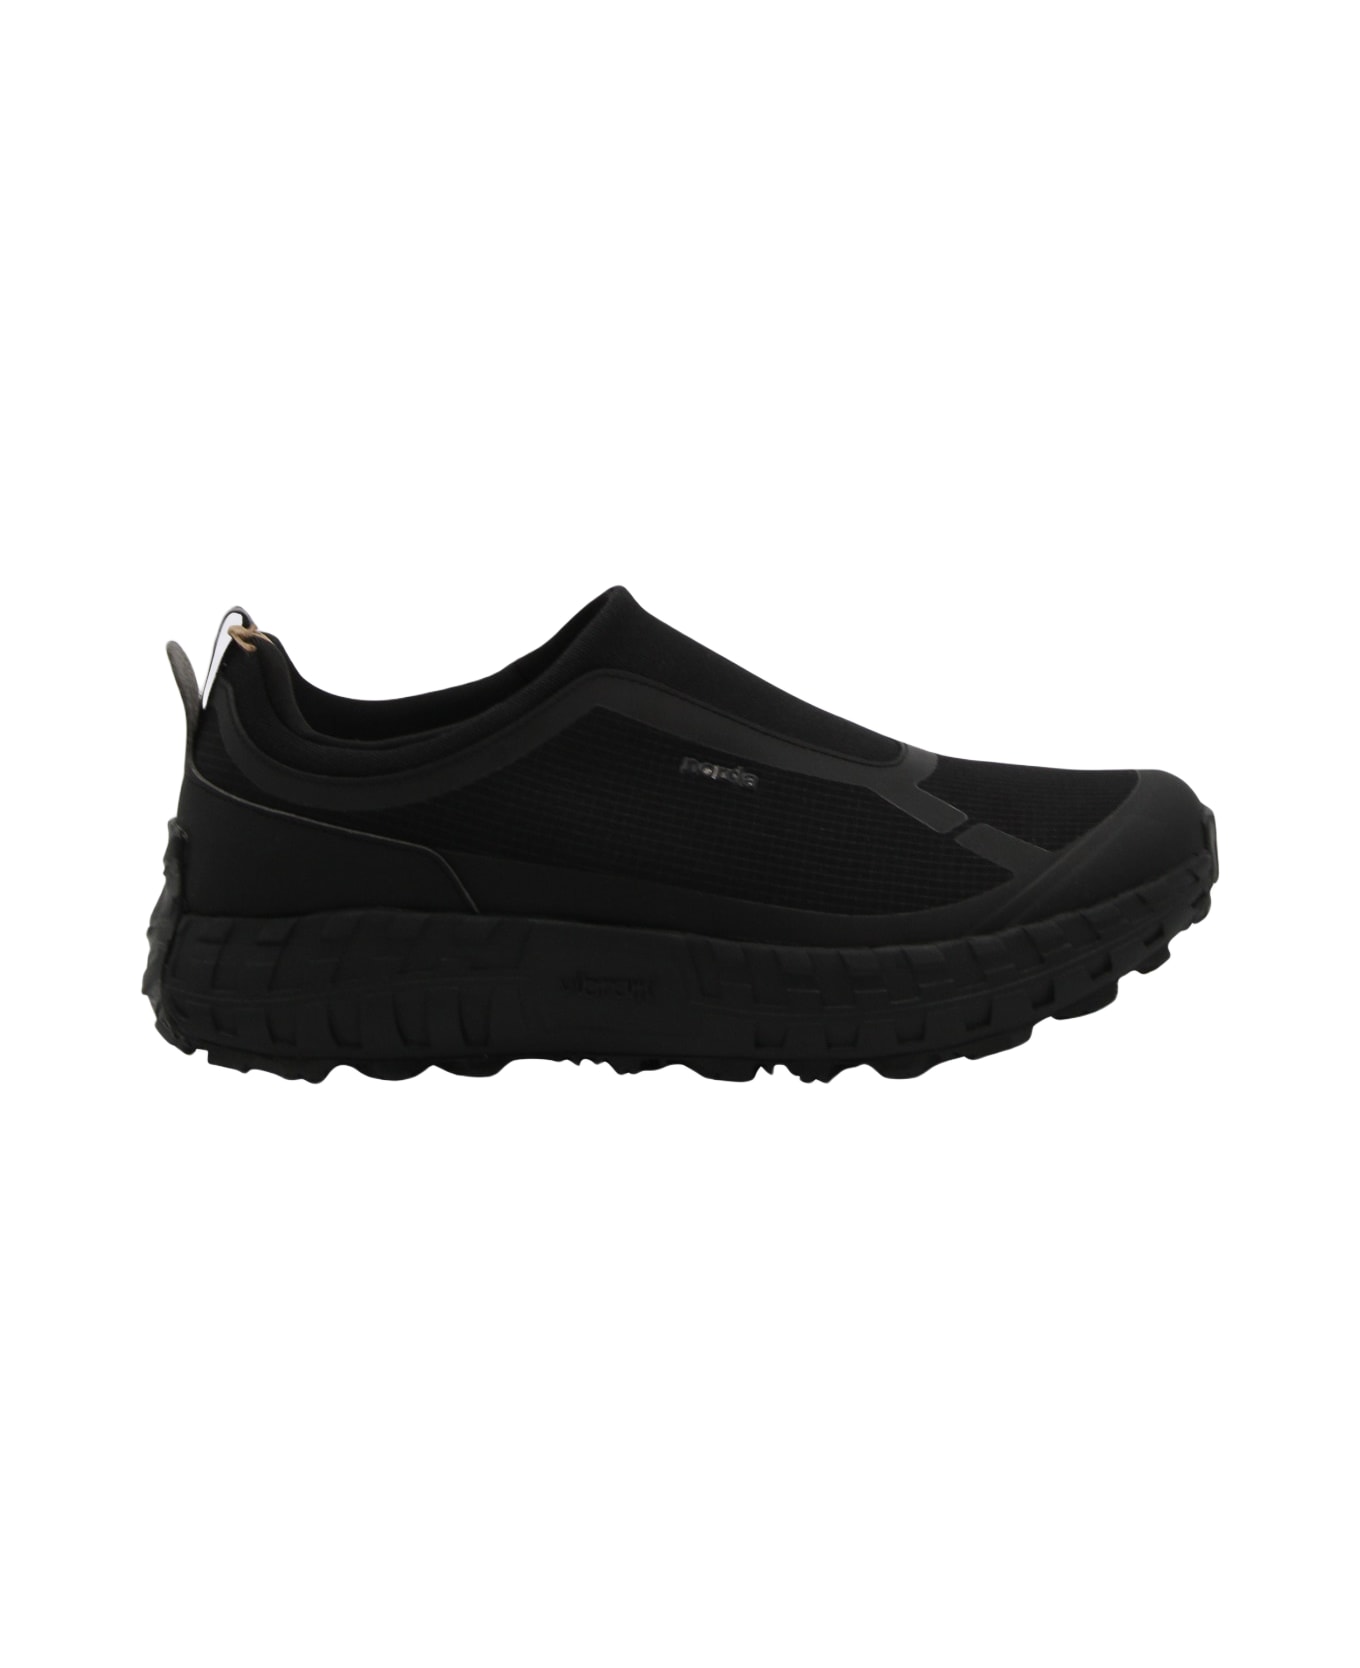 Norda Black The 003 W Pitch Sneakers - Black